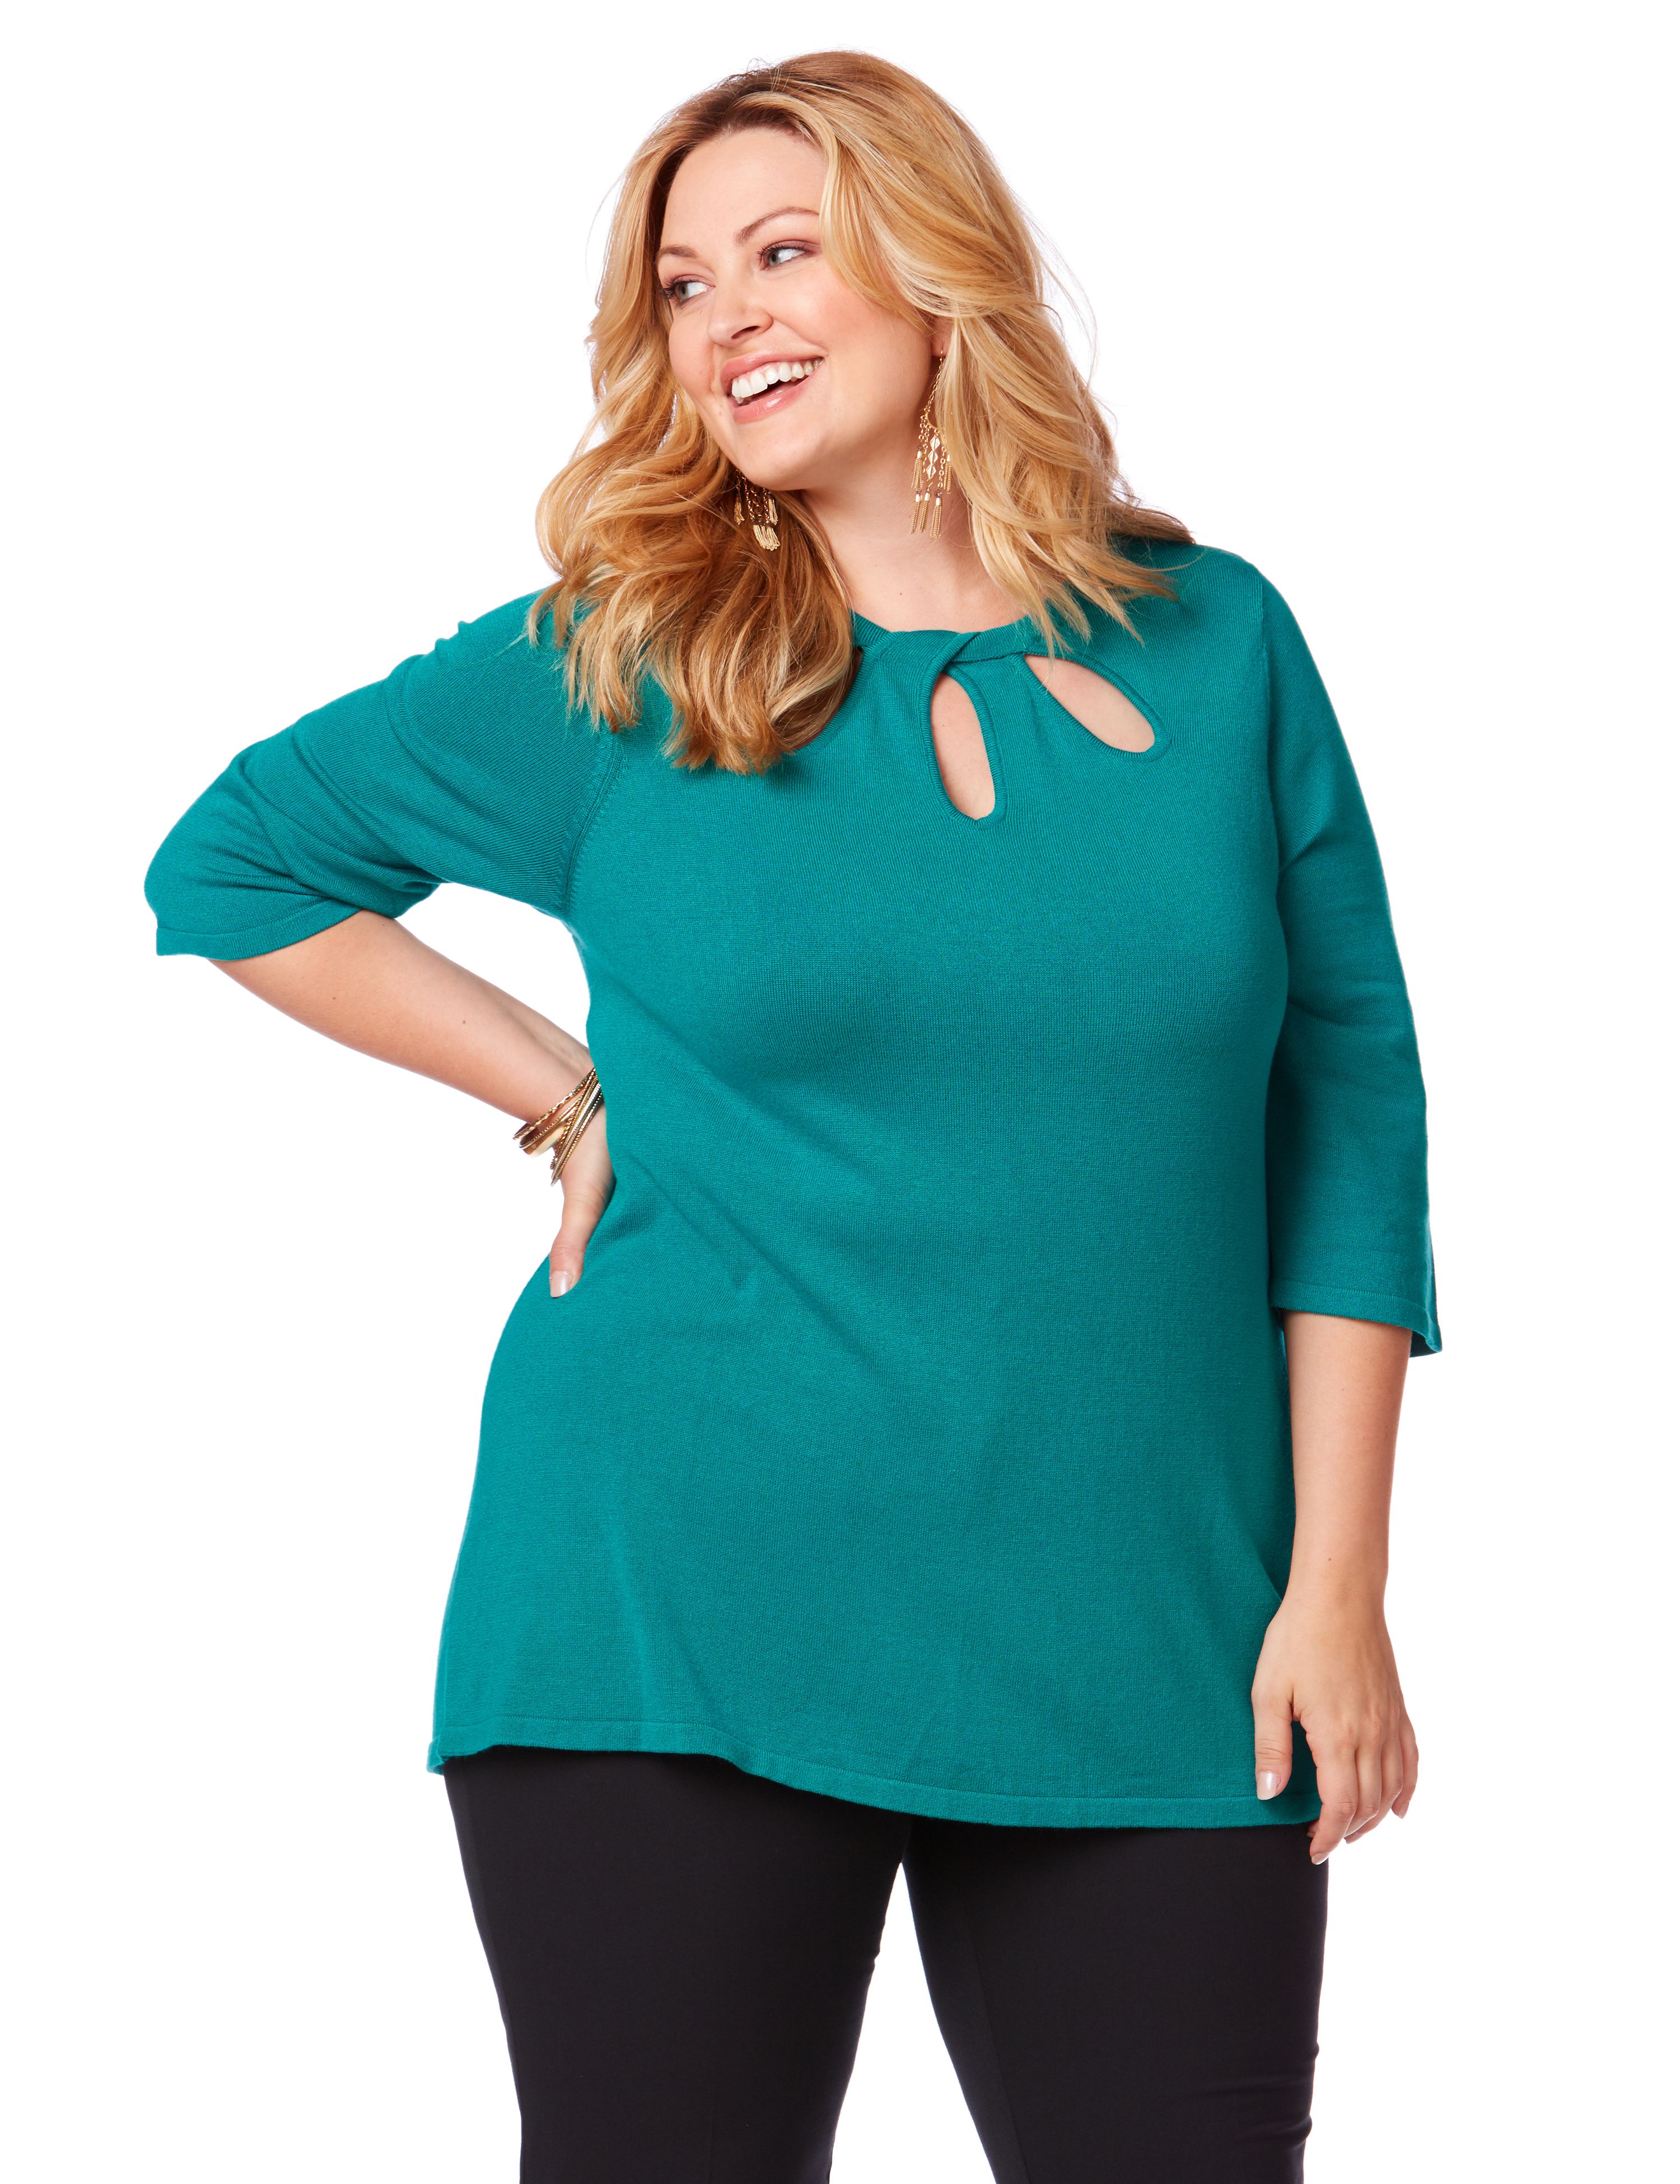 Plus Size Women's Tops, Blouses & Shirts Sizes 16W-34W | Catherines